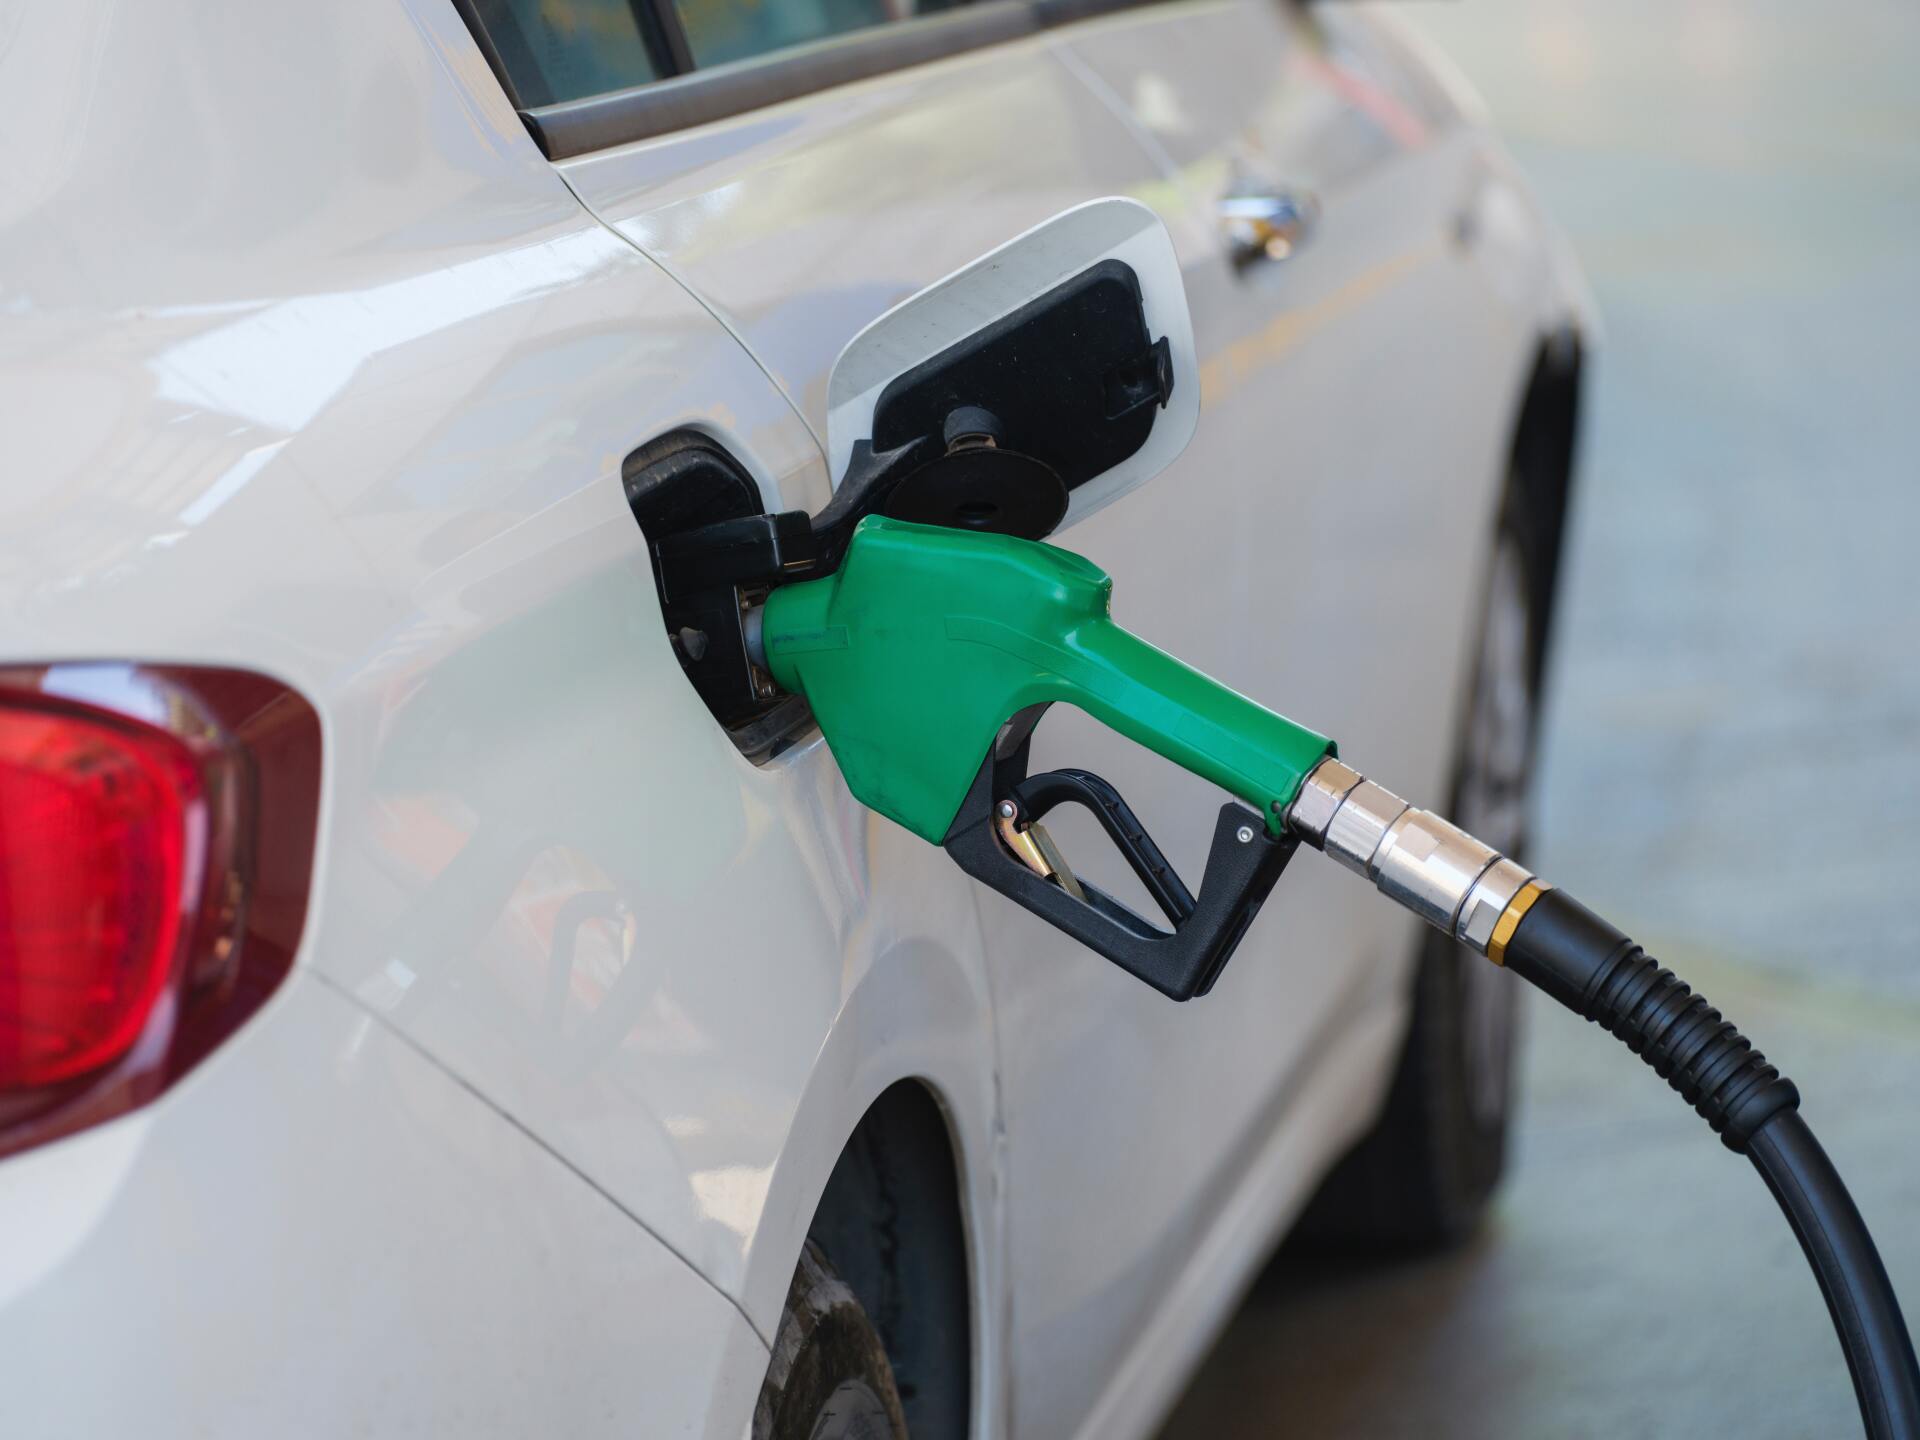 Select Automotive - How Fuel Prices are Impacting Online Retailers